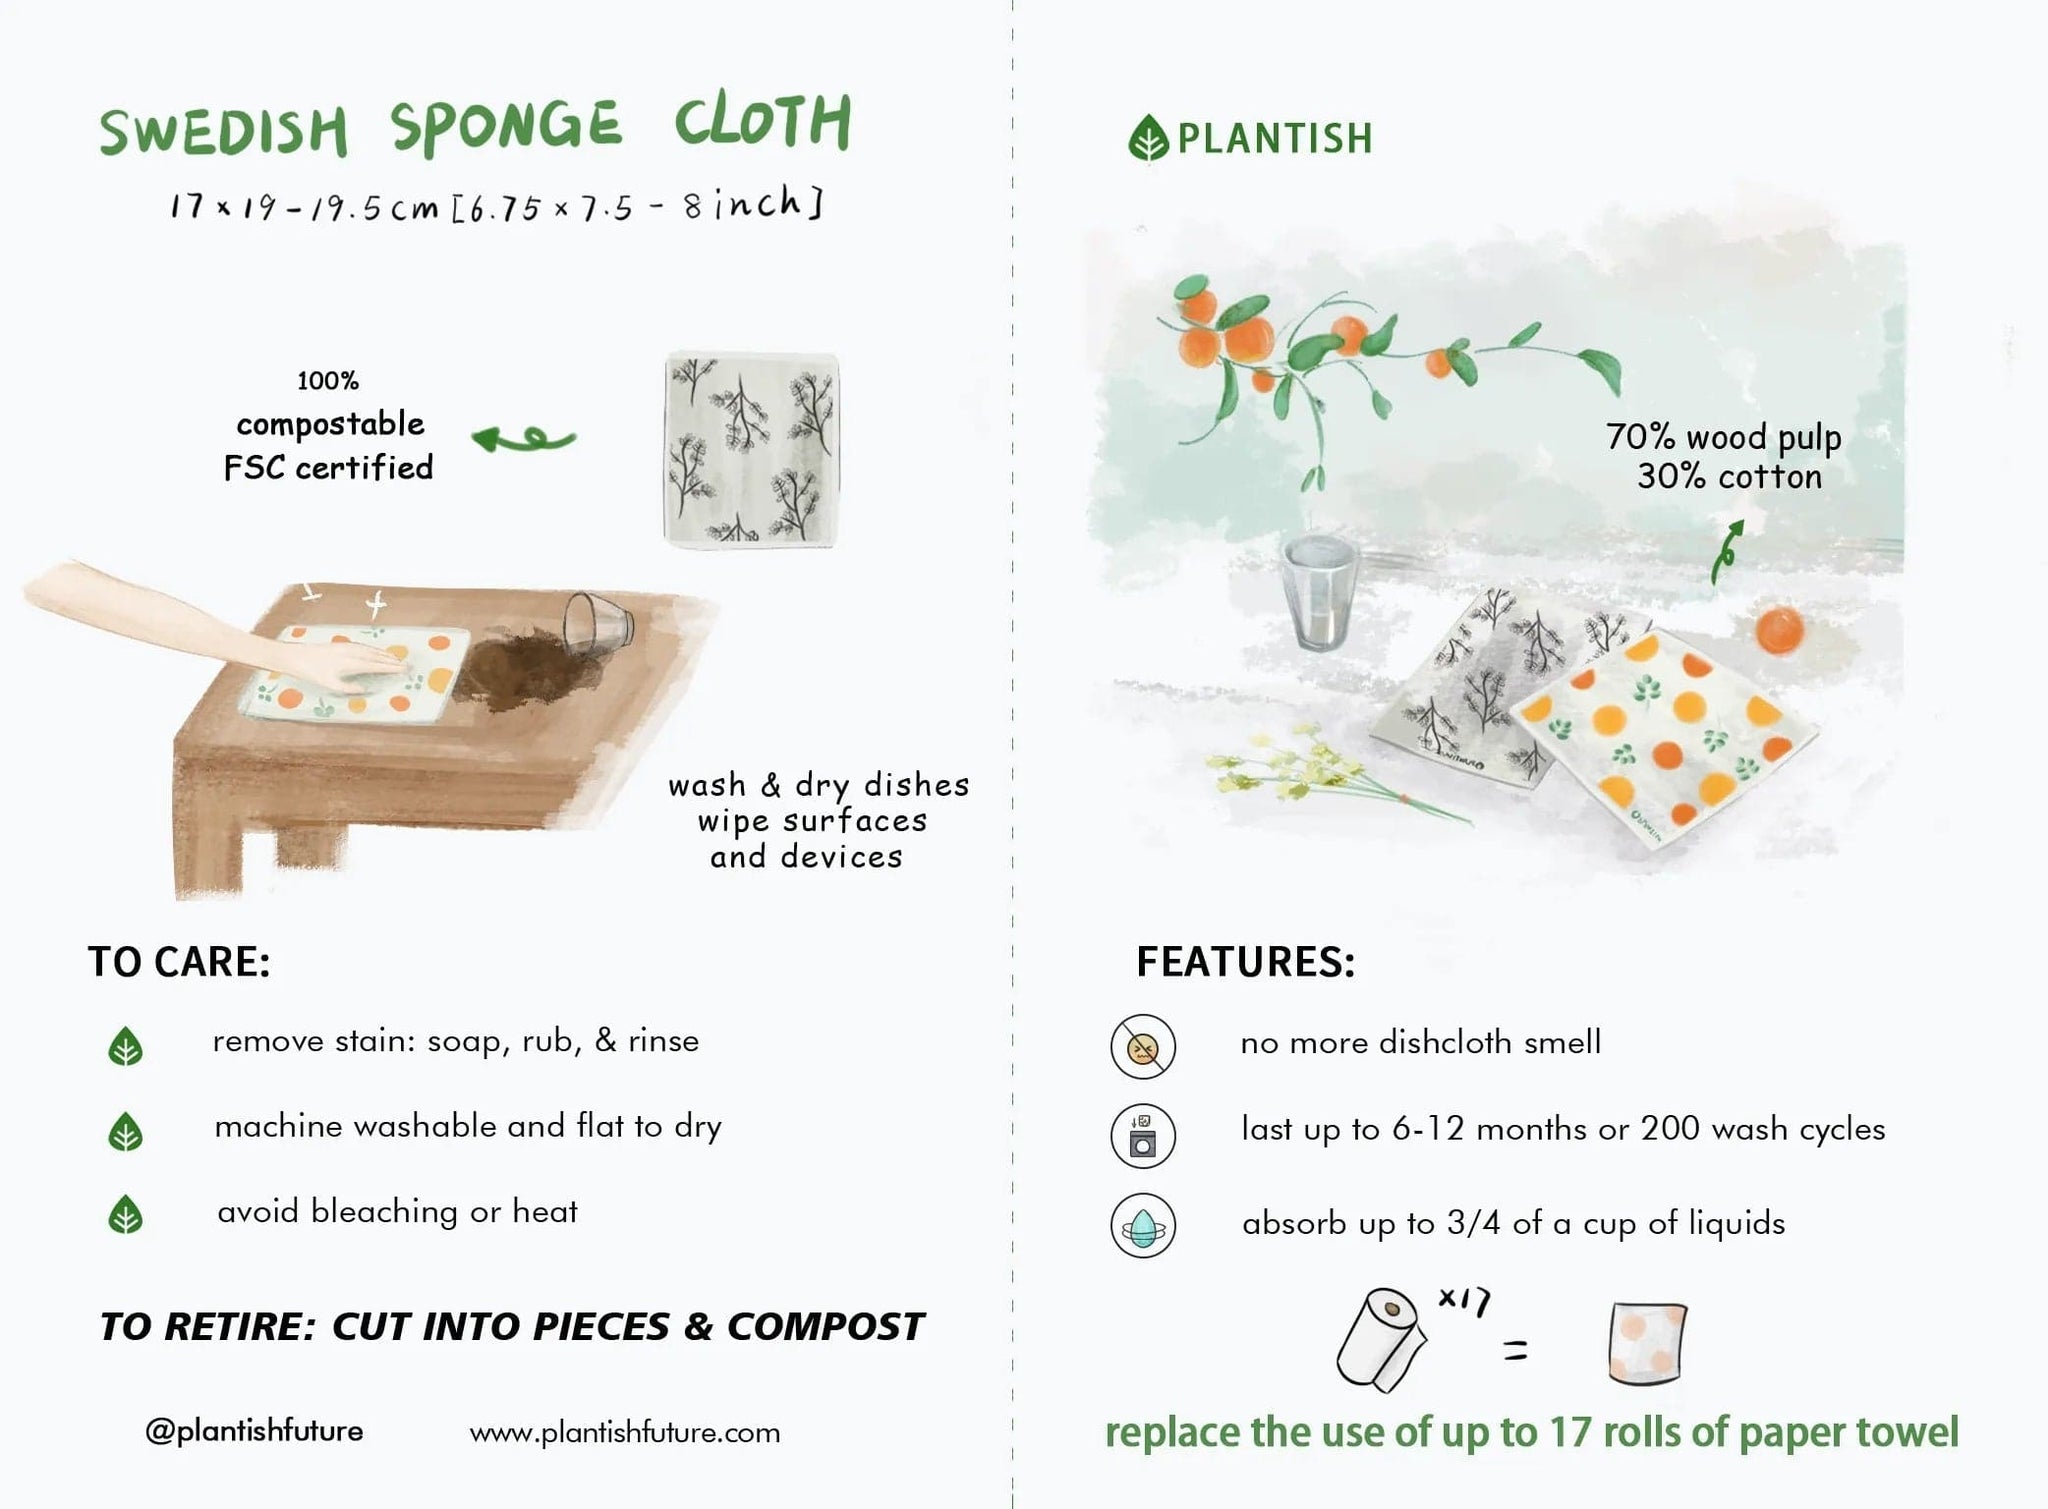 Care tips on how to take care of your plastic free reusable Swedish dishcloth. Made with wood pulp and cotton so it's 100% compostable!